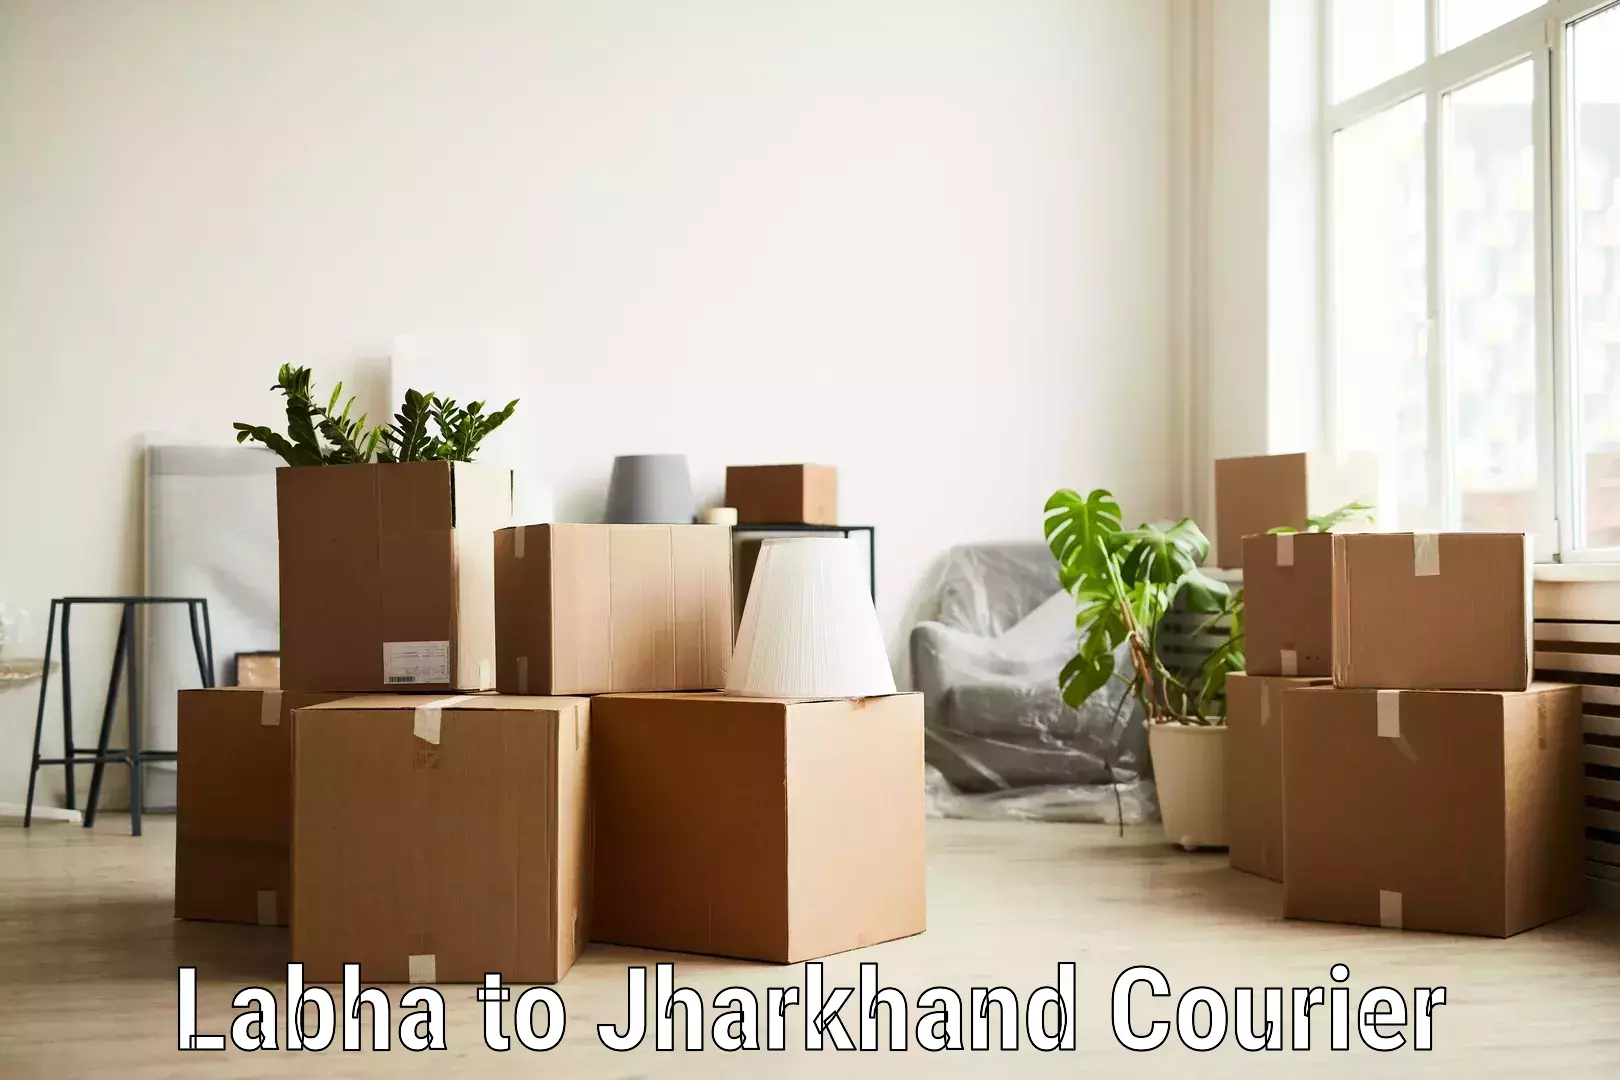 Customer-centric shipping in Labha to Dhanbad